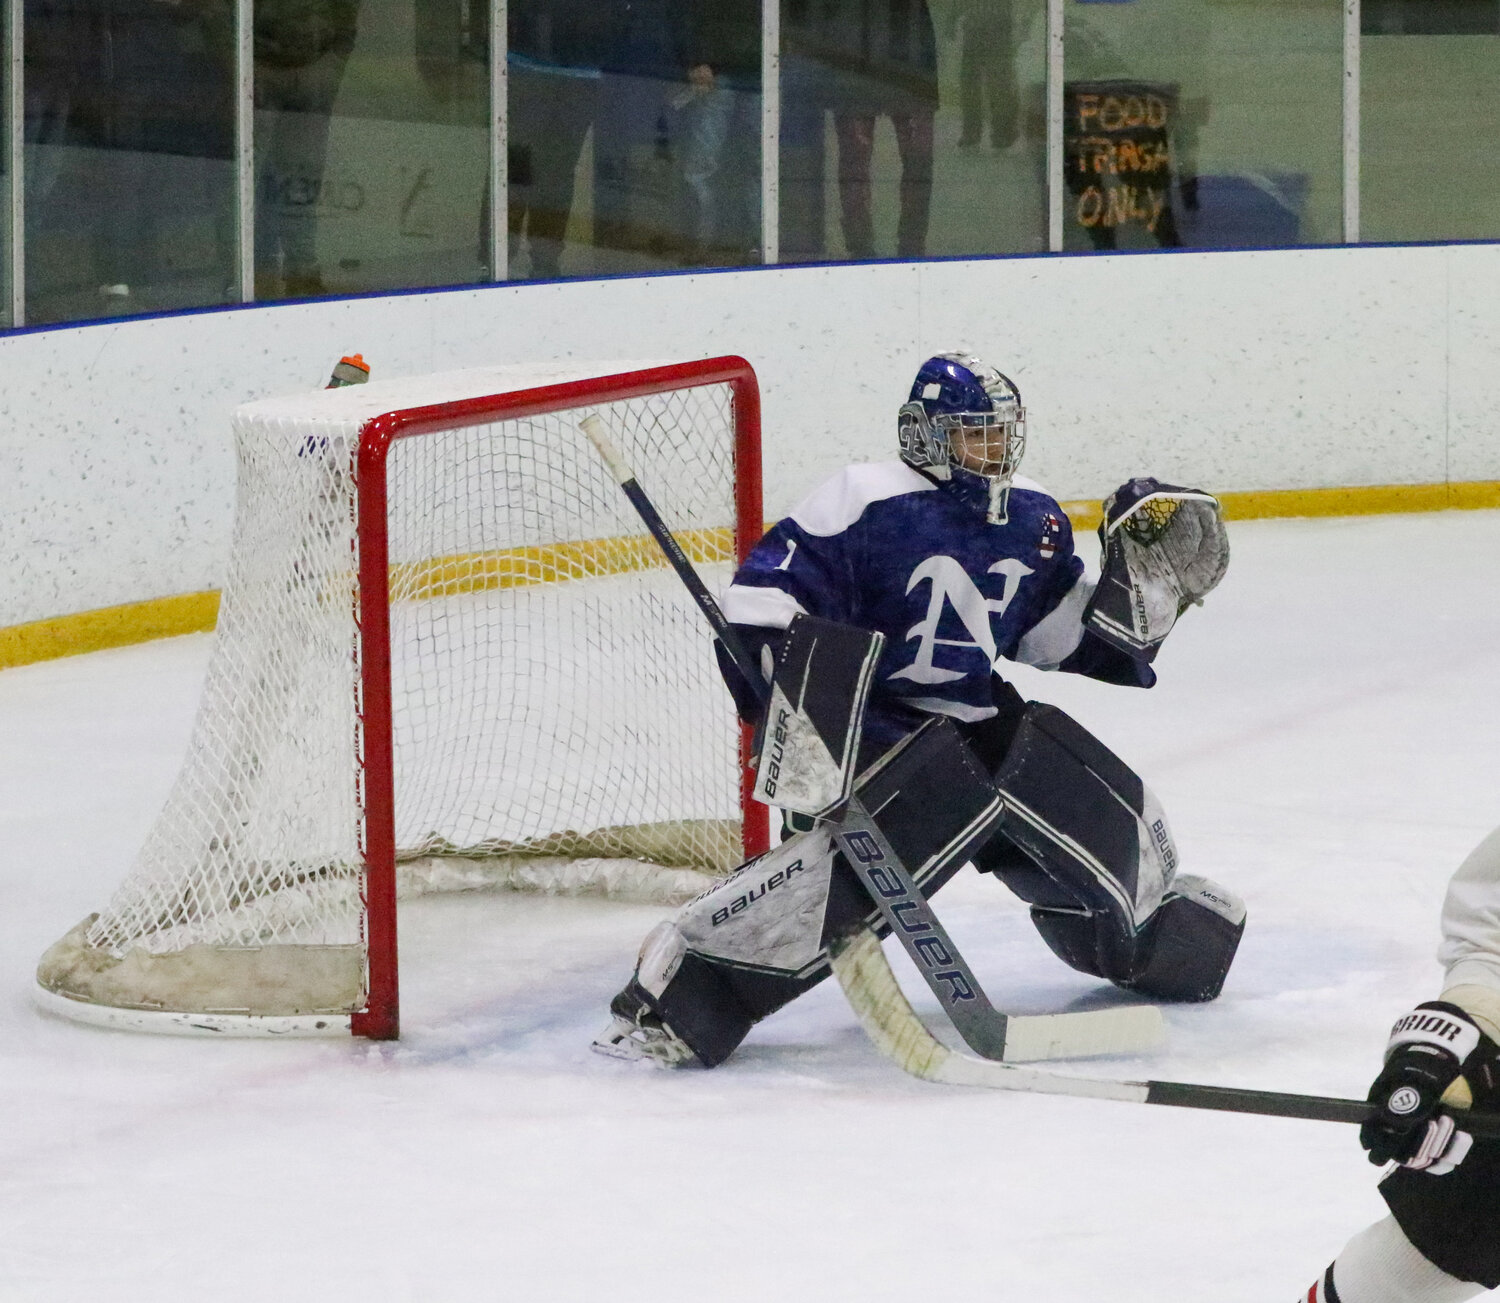 The NHS varsity boys hockey team faced off against alumni Saturday afternoon at Nantucket Ice.